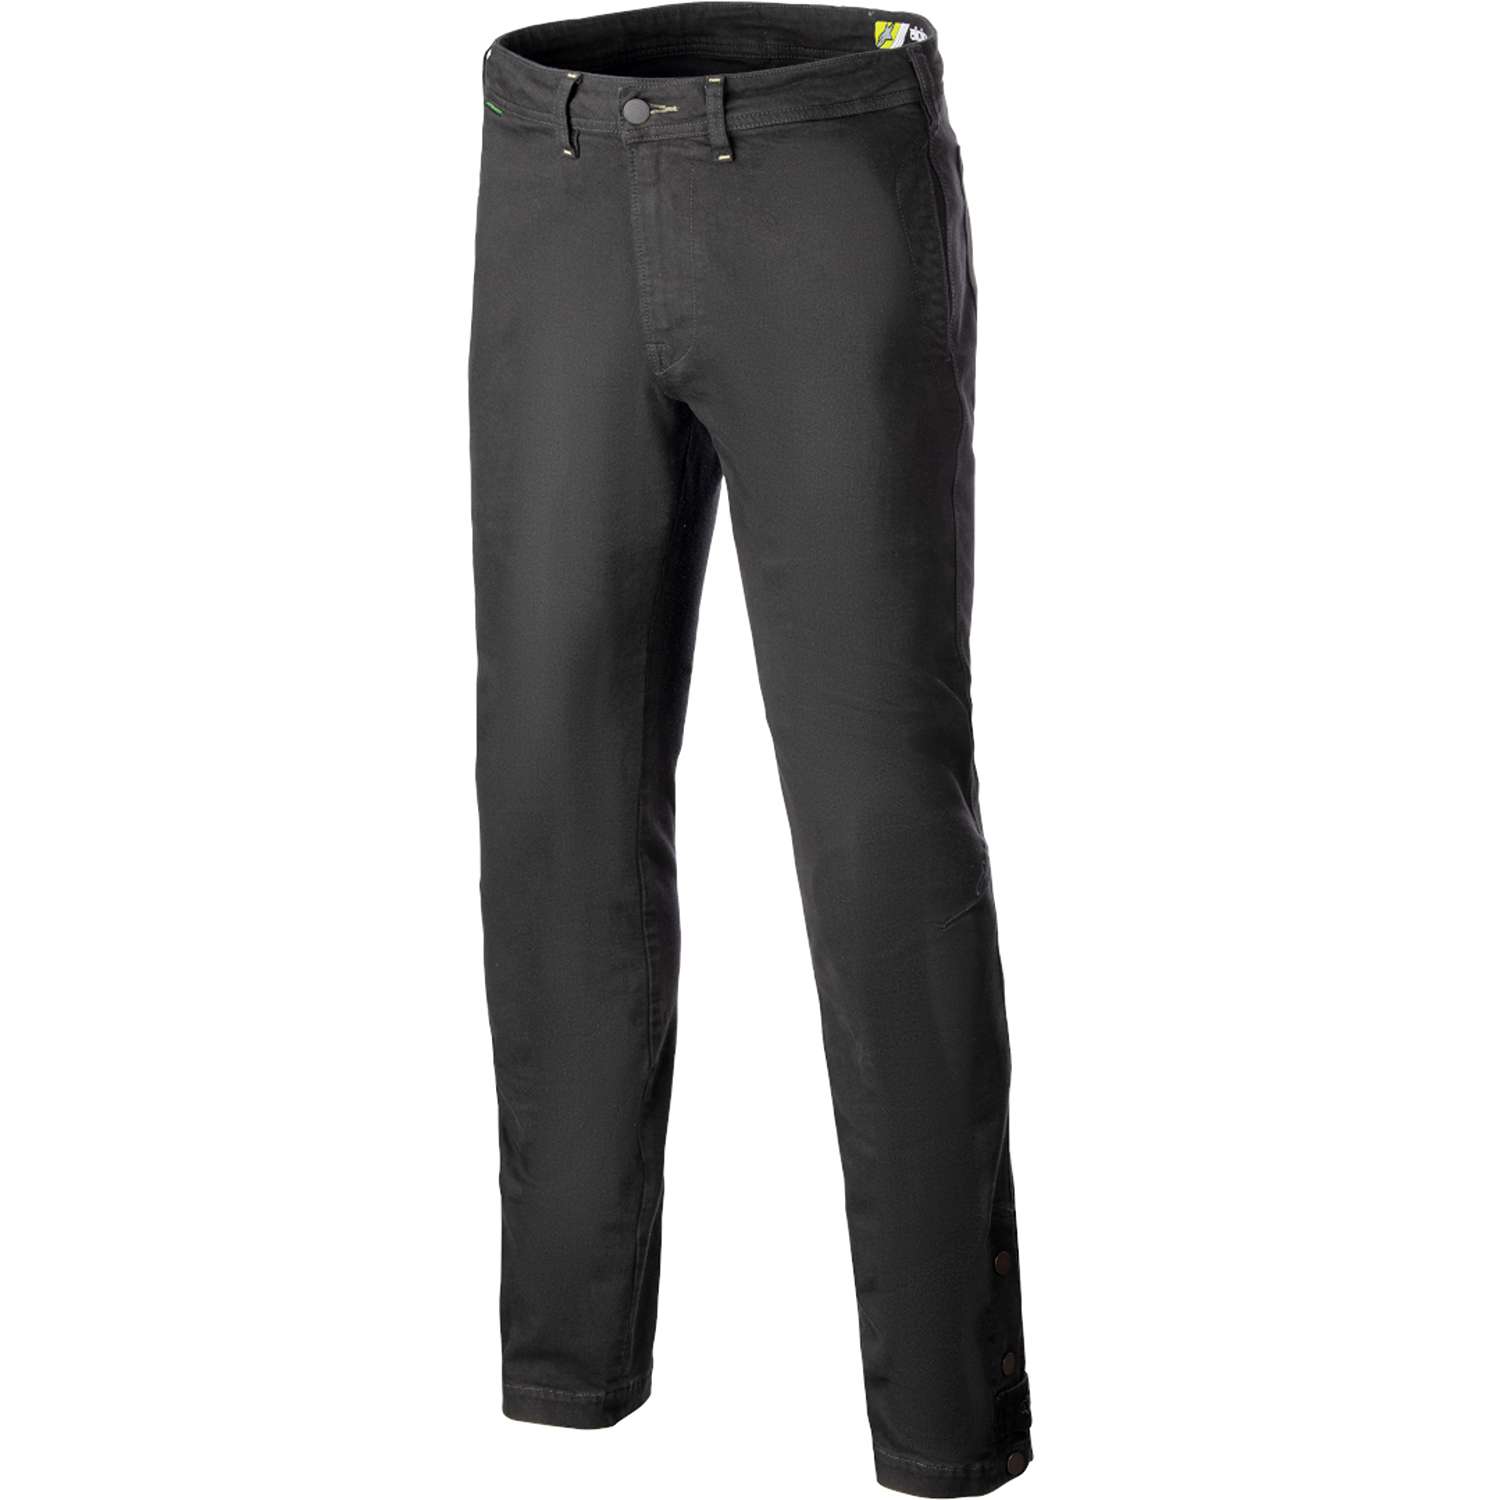 Image of Alpinestars Stratos Regular Fit Tech Riding Pants Anthracite Taille 34